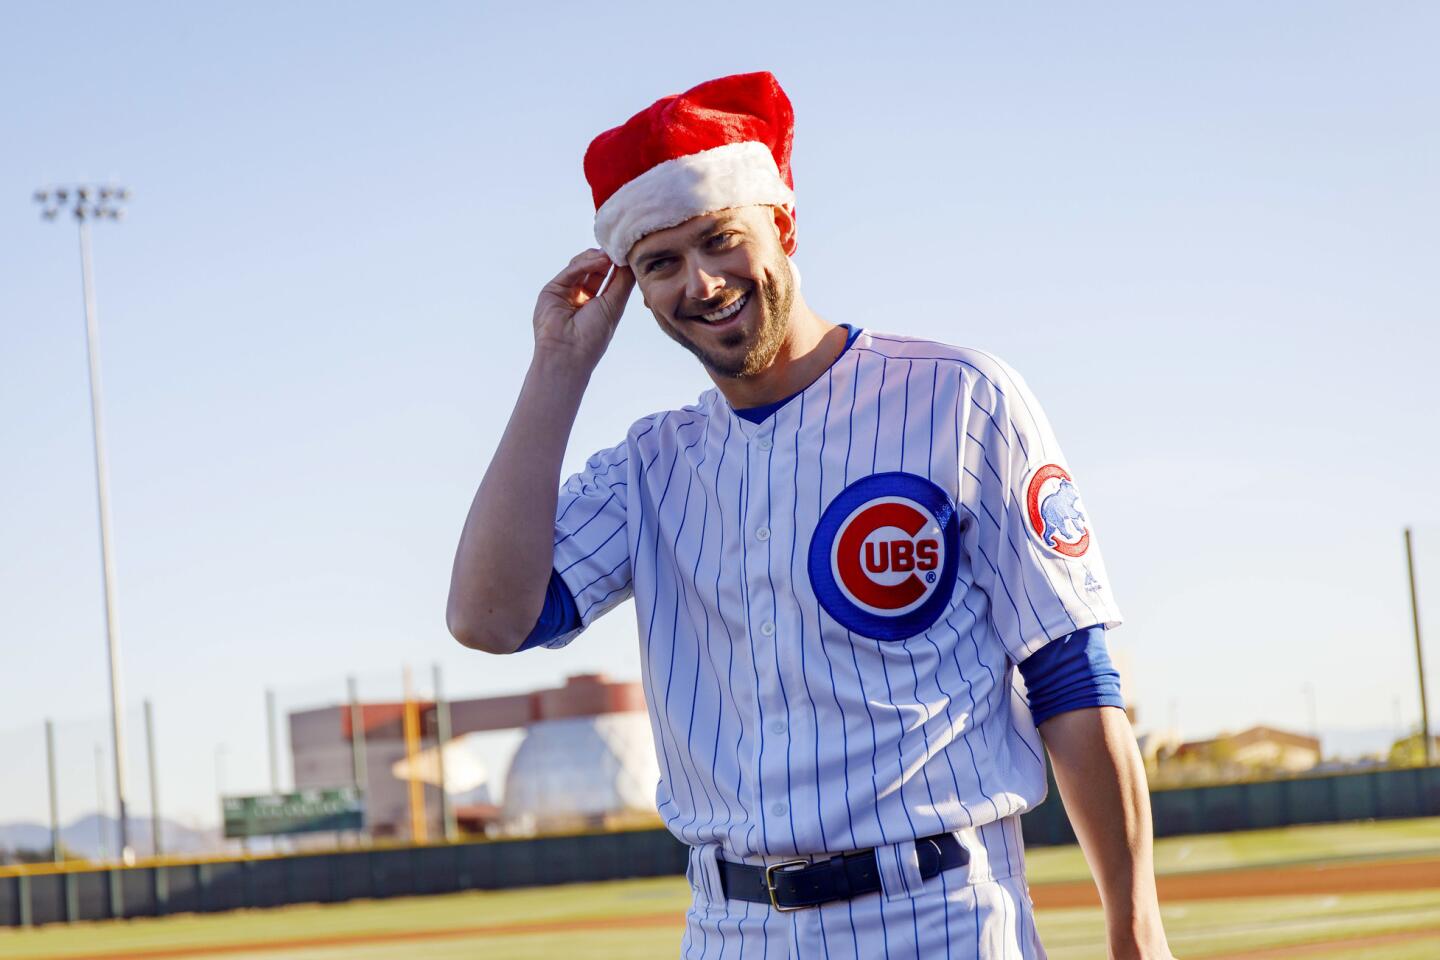 Chicago Cubs: Kris Bryant Can Make History with MVP